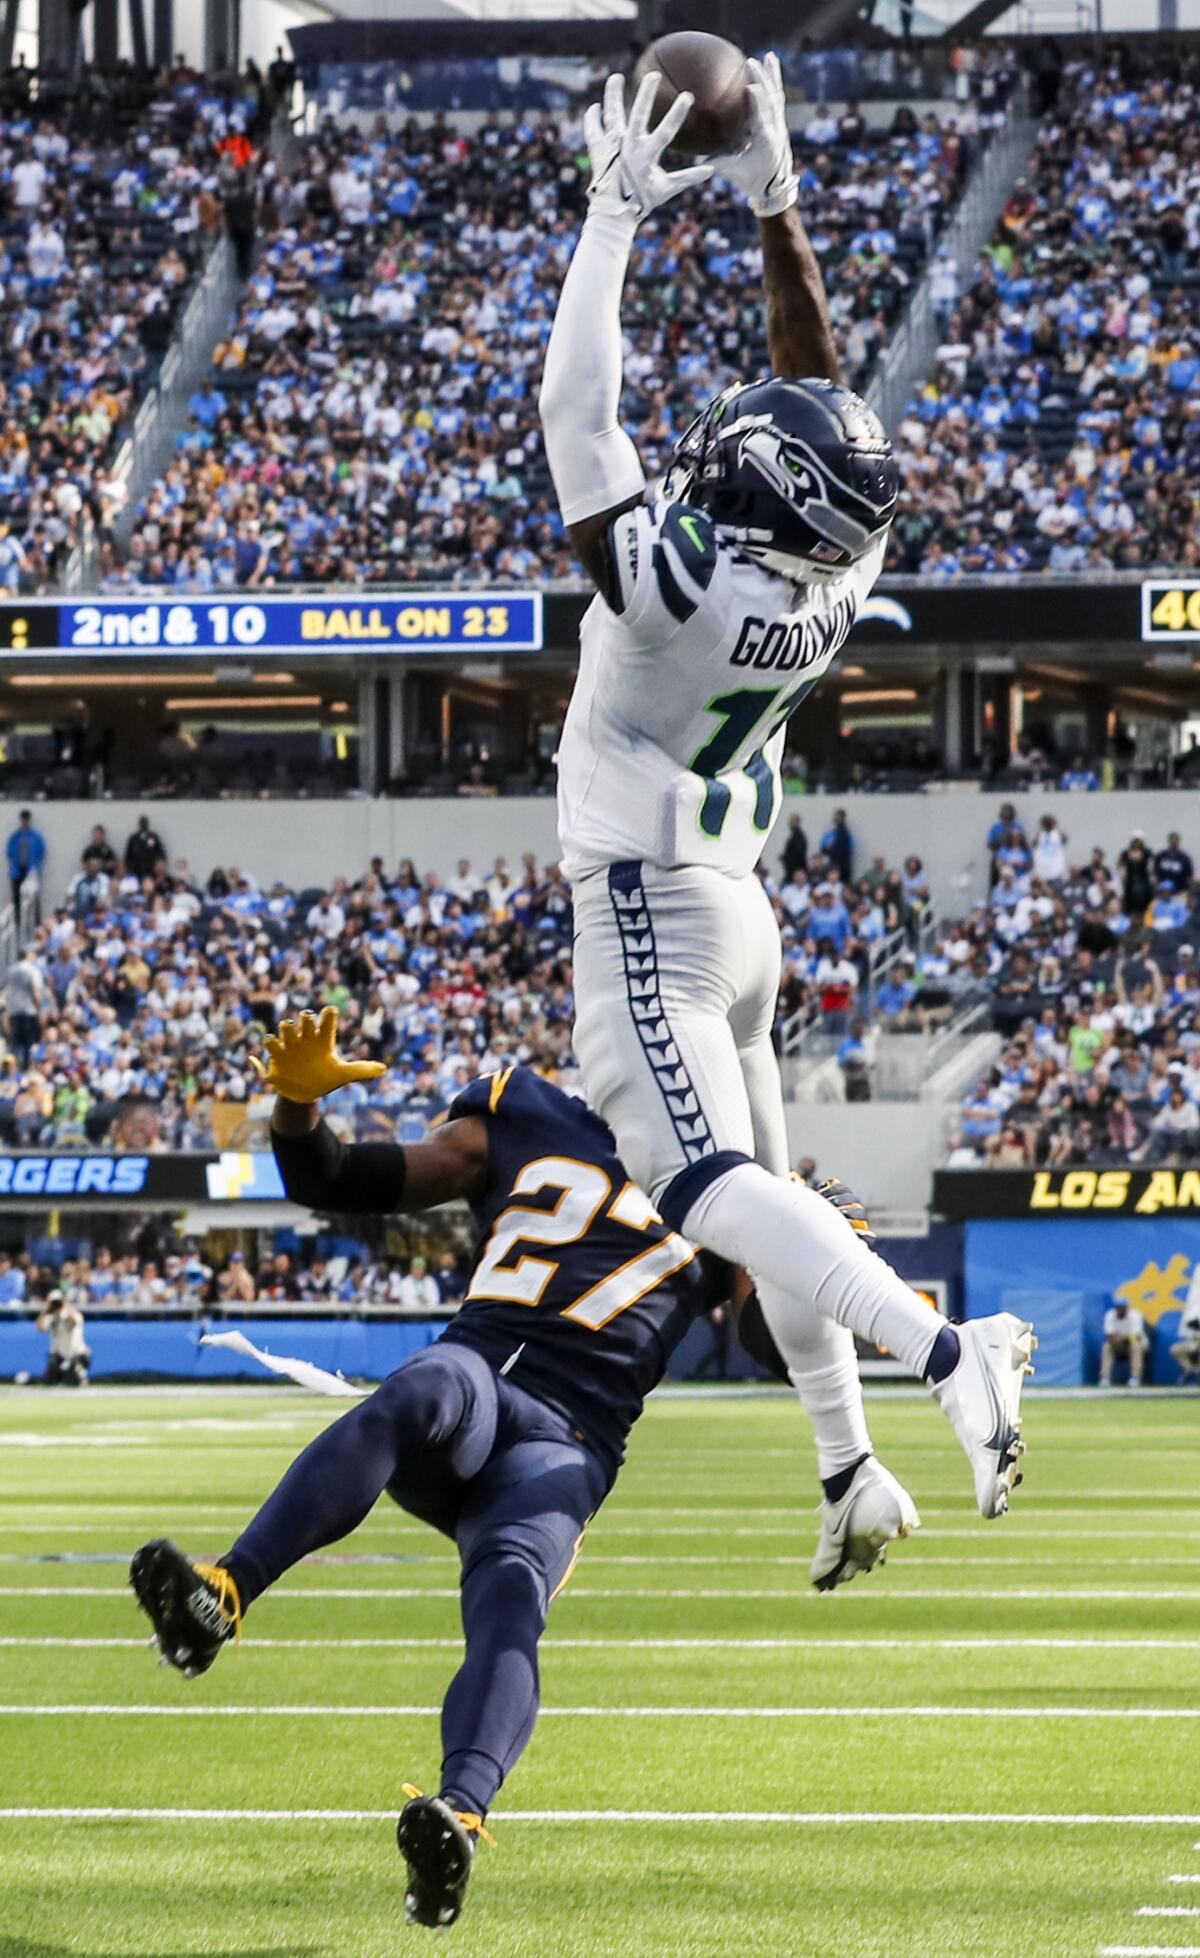 Seattle's Marquise Goodwin (11) catches a TD pass after Chargers corner J.C. Jackson (27) fell because of an injured knee.